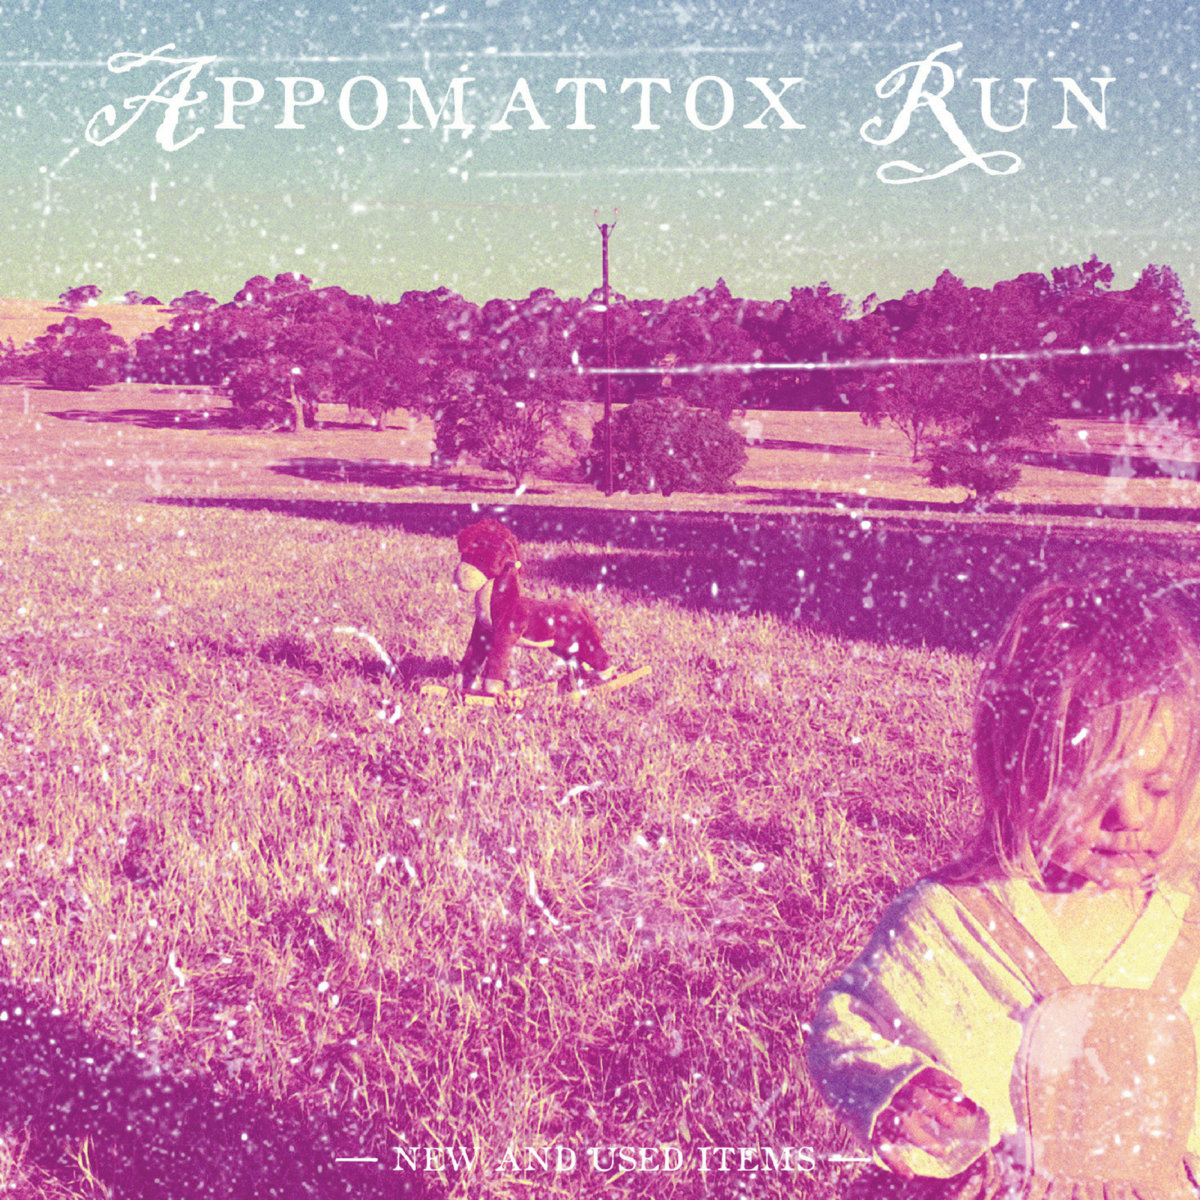 Appomattox Run - "New and Used Items" [Recorded, Mixed and Mastered (JP)]